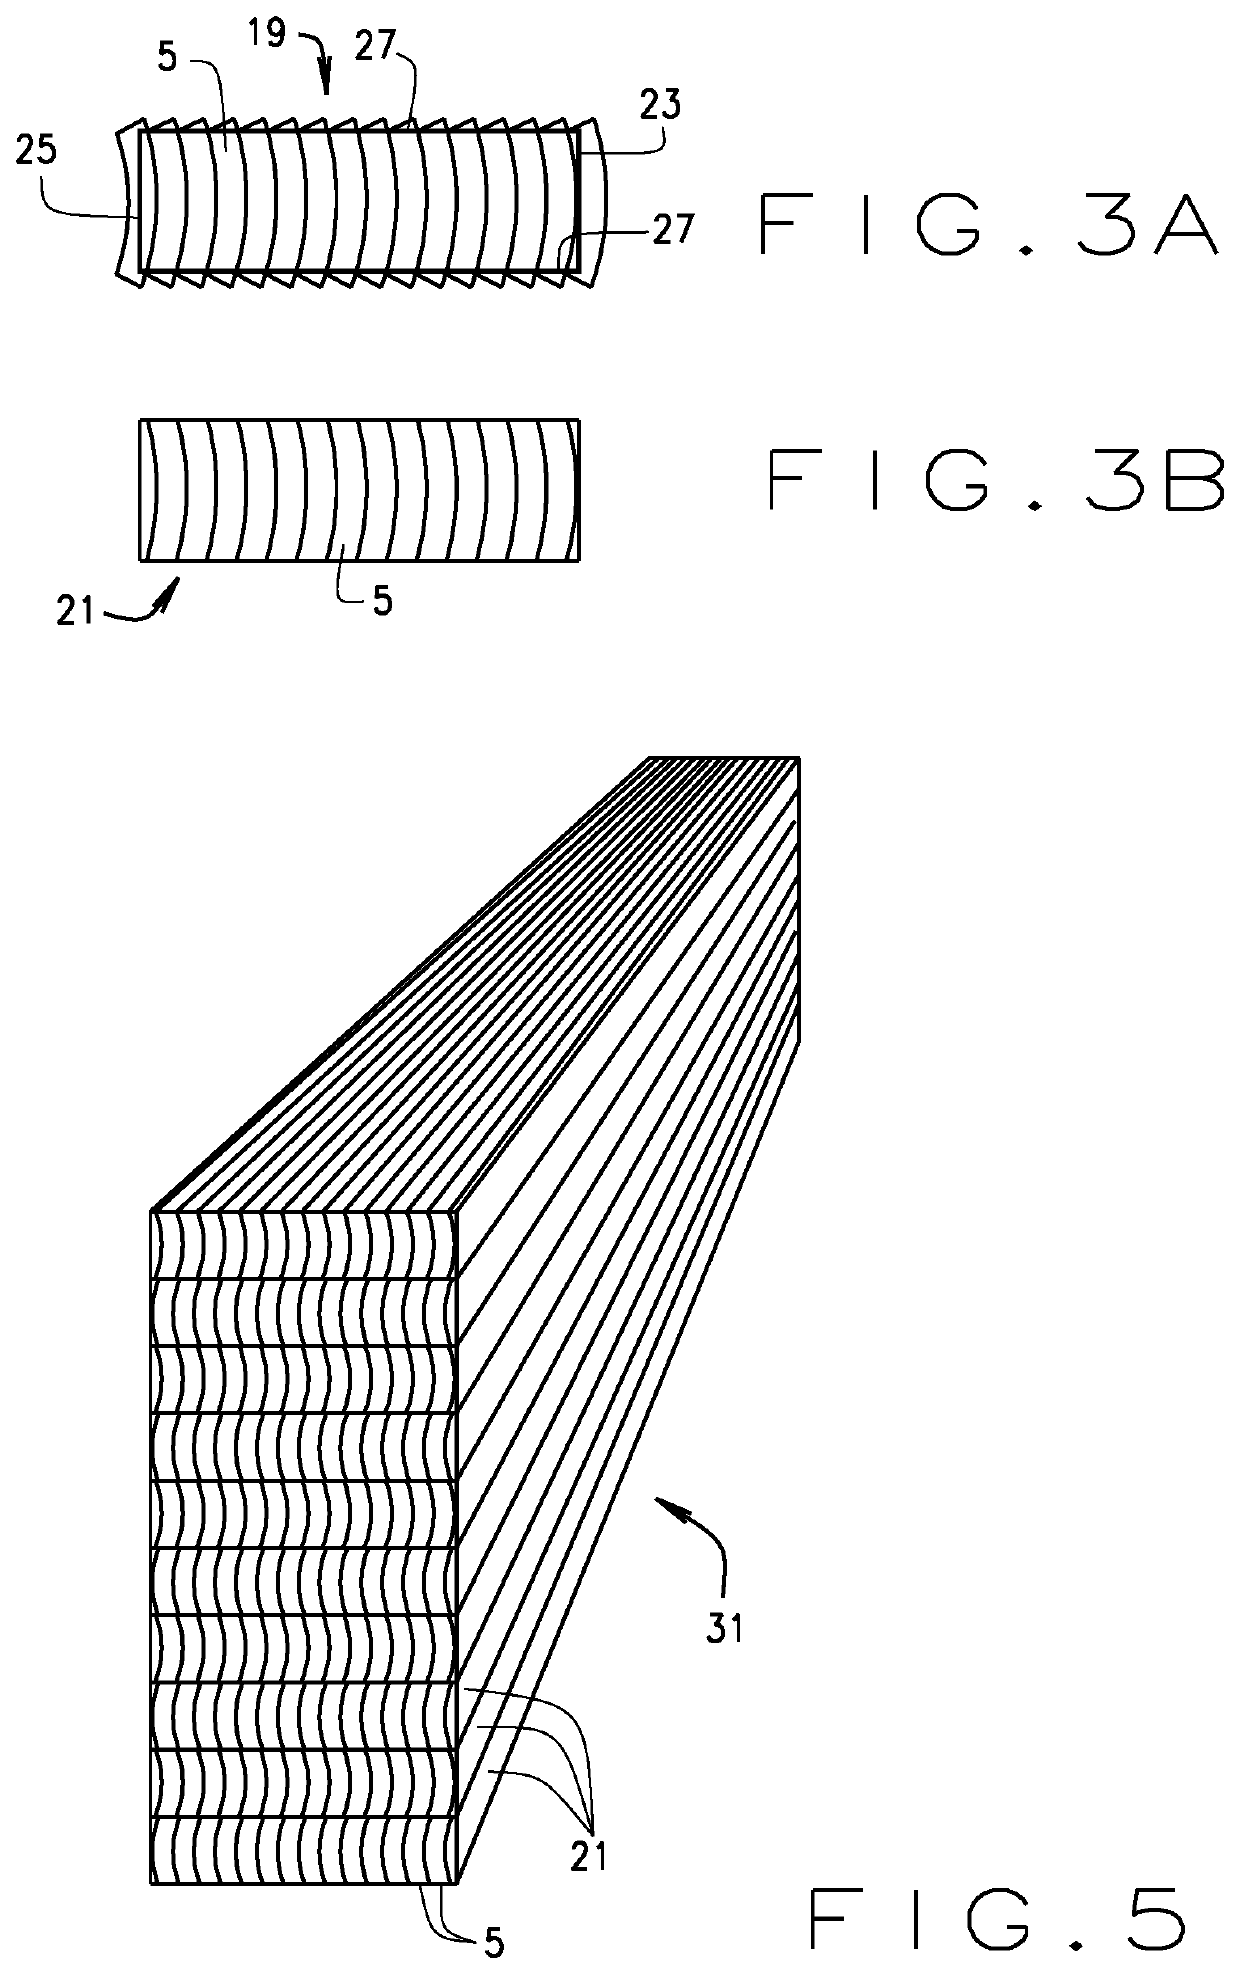 Laminated bamboo structural components and panels and methods of forming them